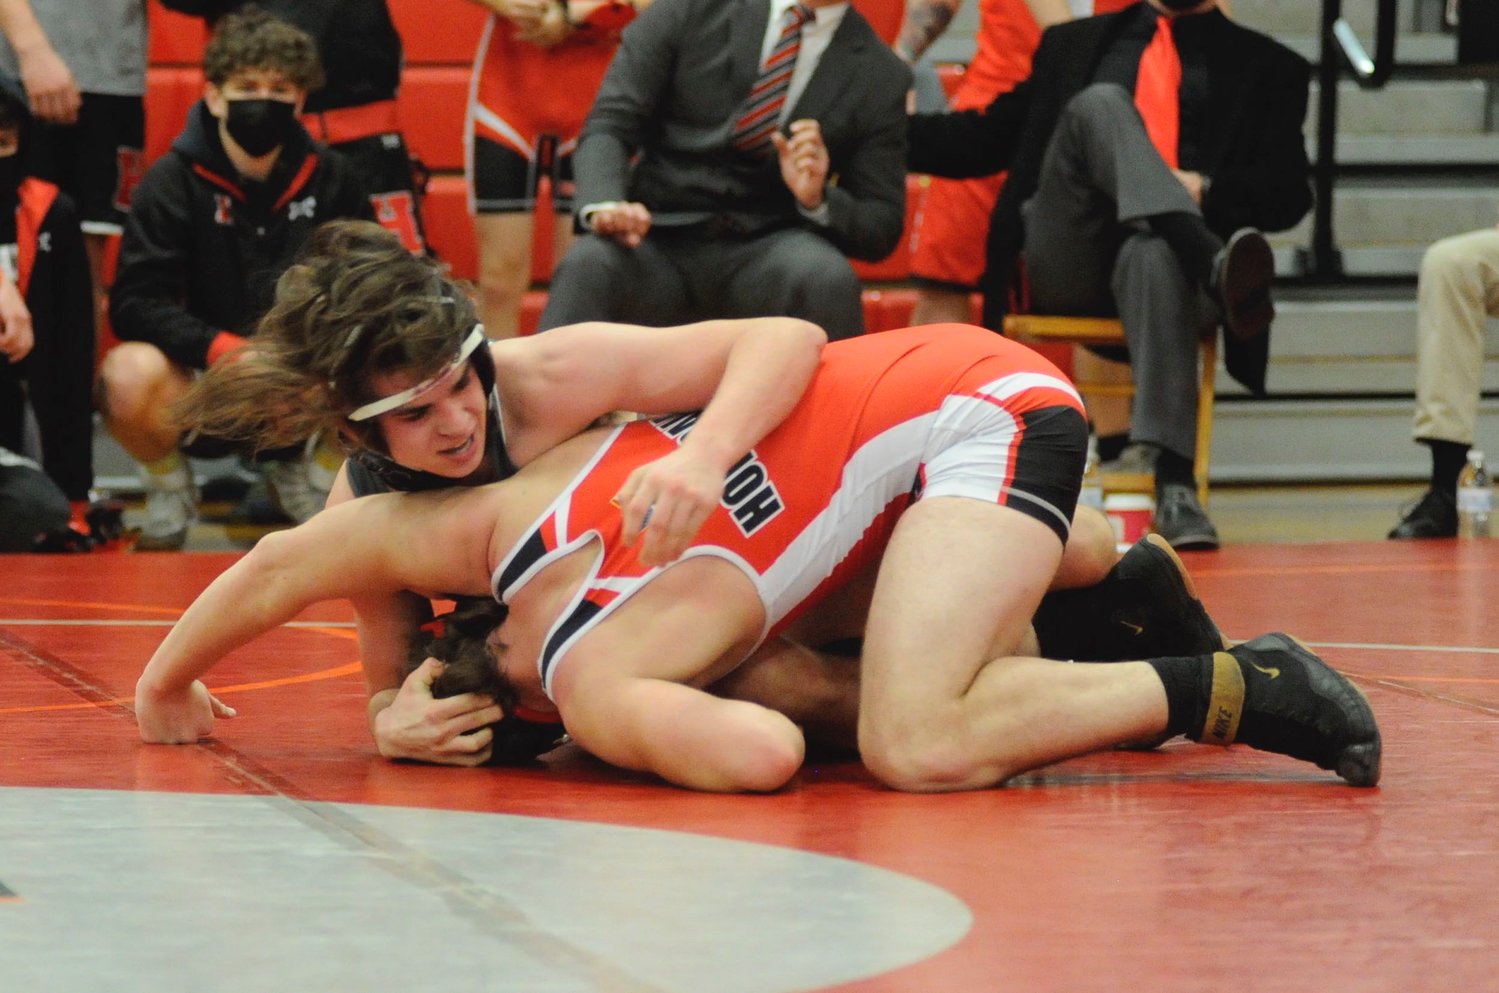 Honesdale’s Tim Dailey won by a 11-7 decision over Kasen Taylor of Western Wayne on Friday, January 29 at “The Home of the Hornets.” The Hornets posted a 50-21 victory in their first game of the season.